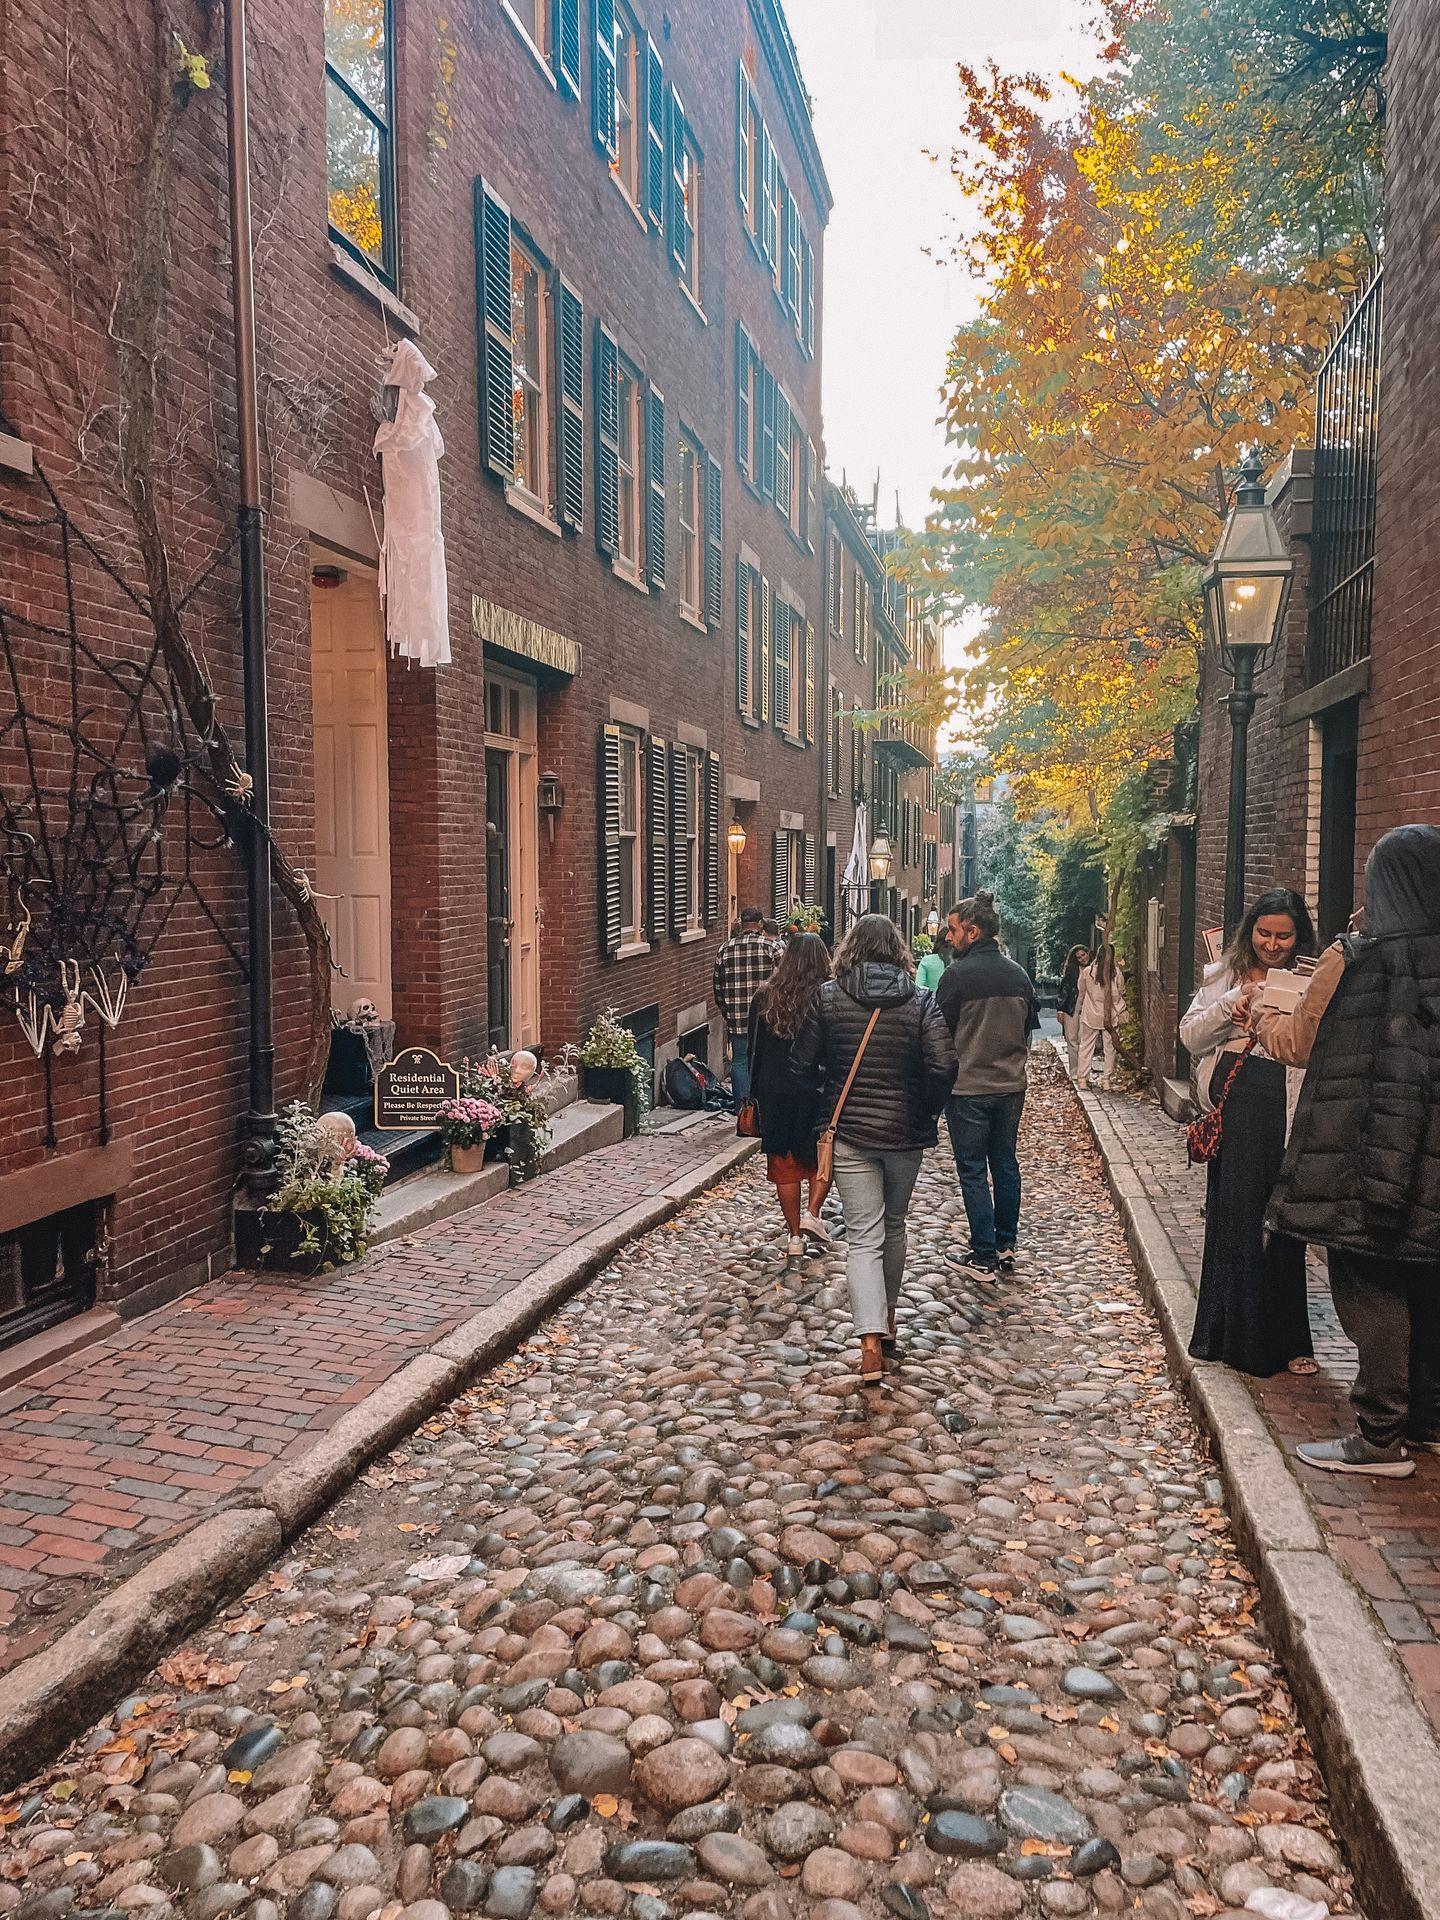 A crowded Acorn Street, which is made of cobblestone. There is Halloween decor on some of the houses.